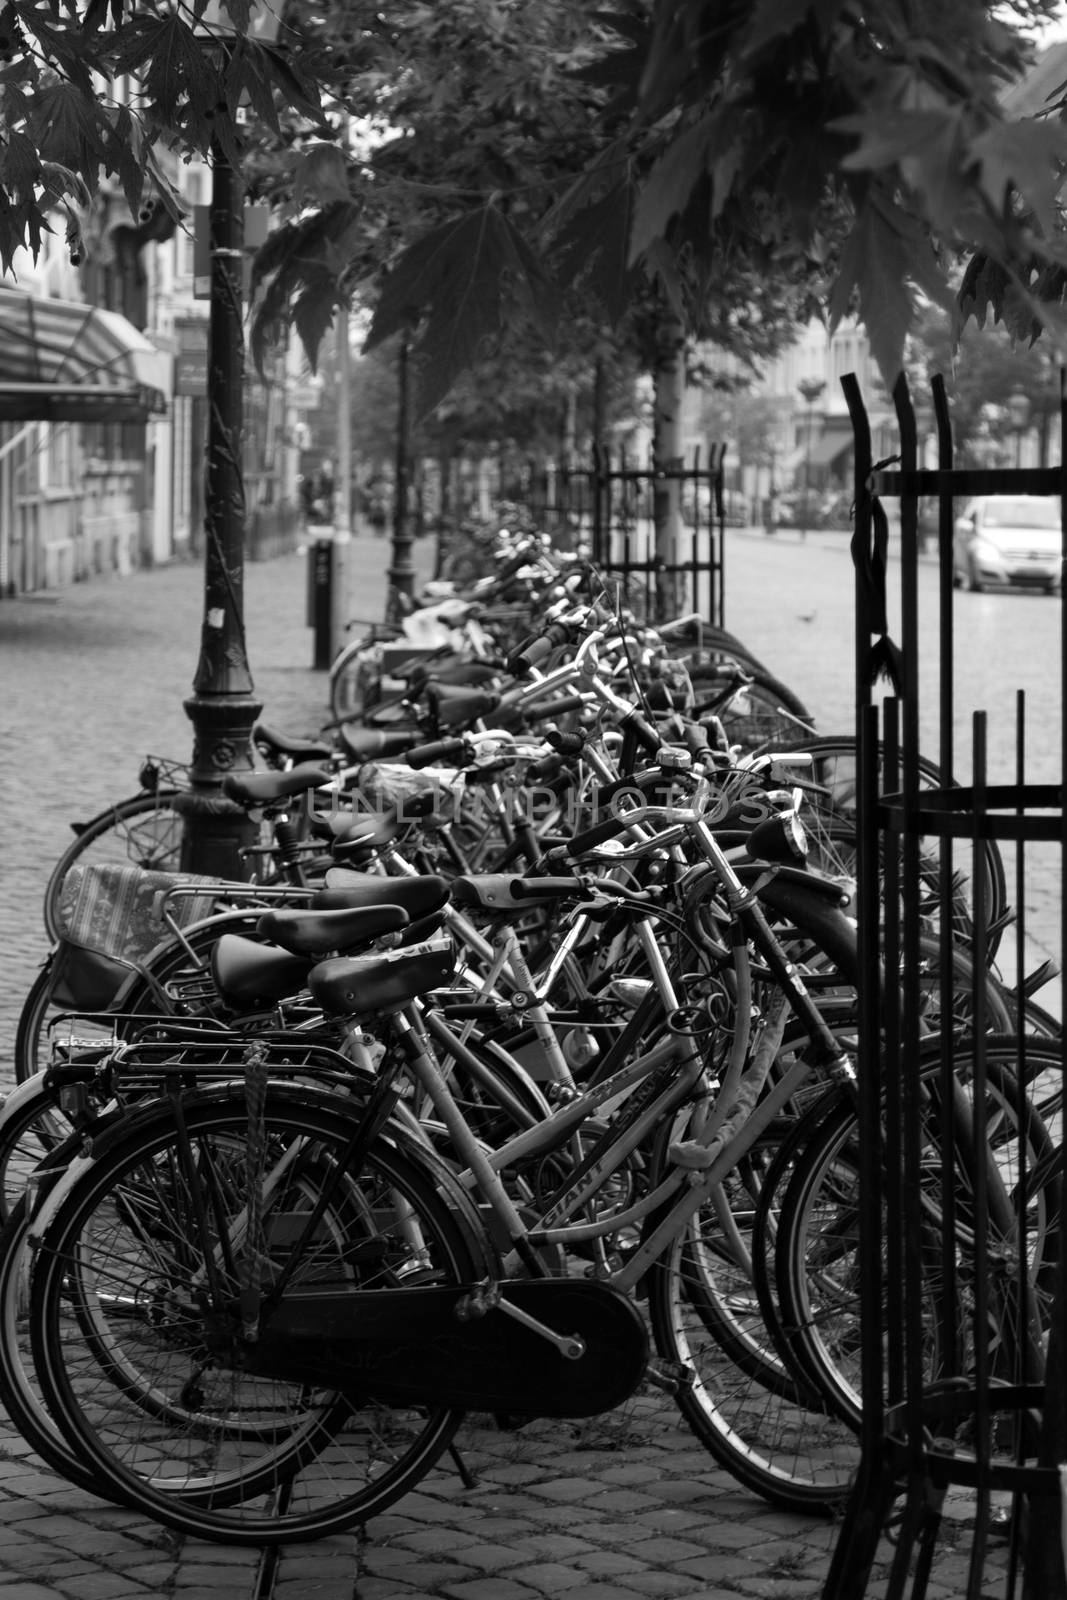 European bicycles in a city parked up